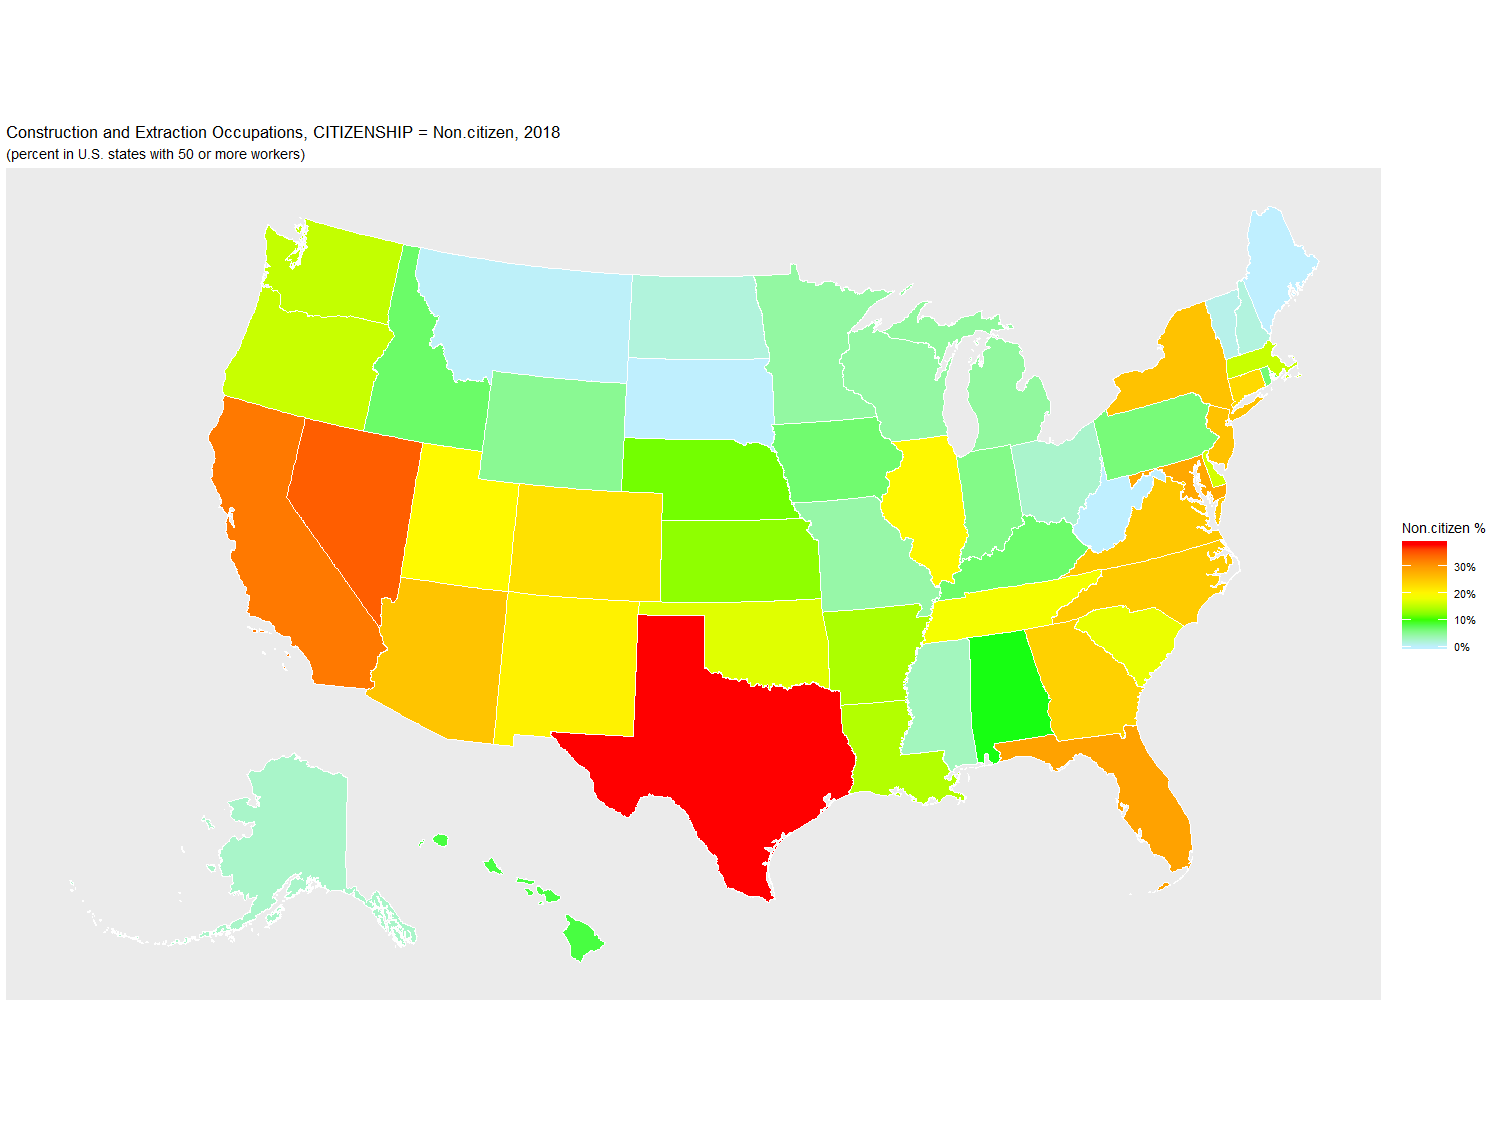 Non-citizen Percentage of Construction and Extraction Occupations by U.S. State, 2018